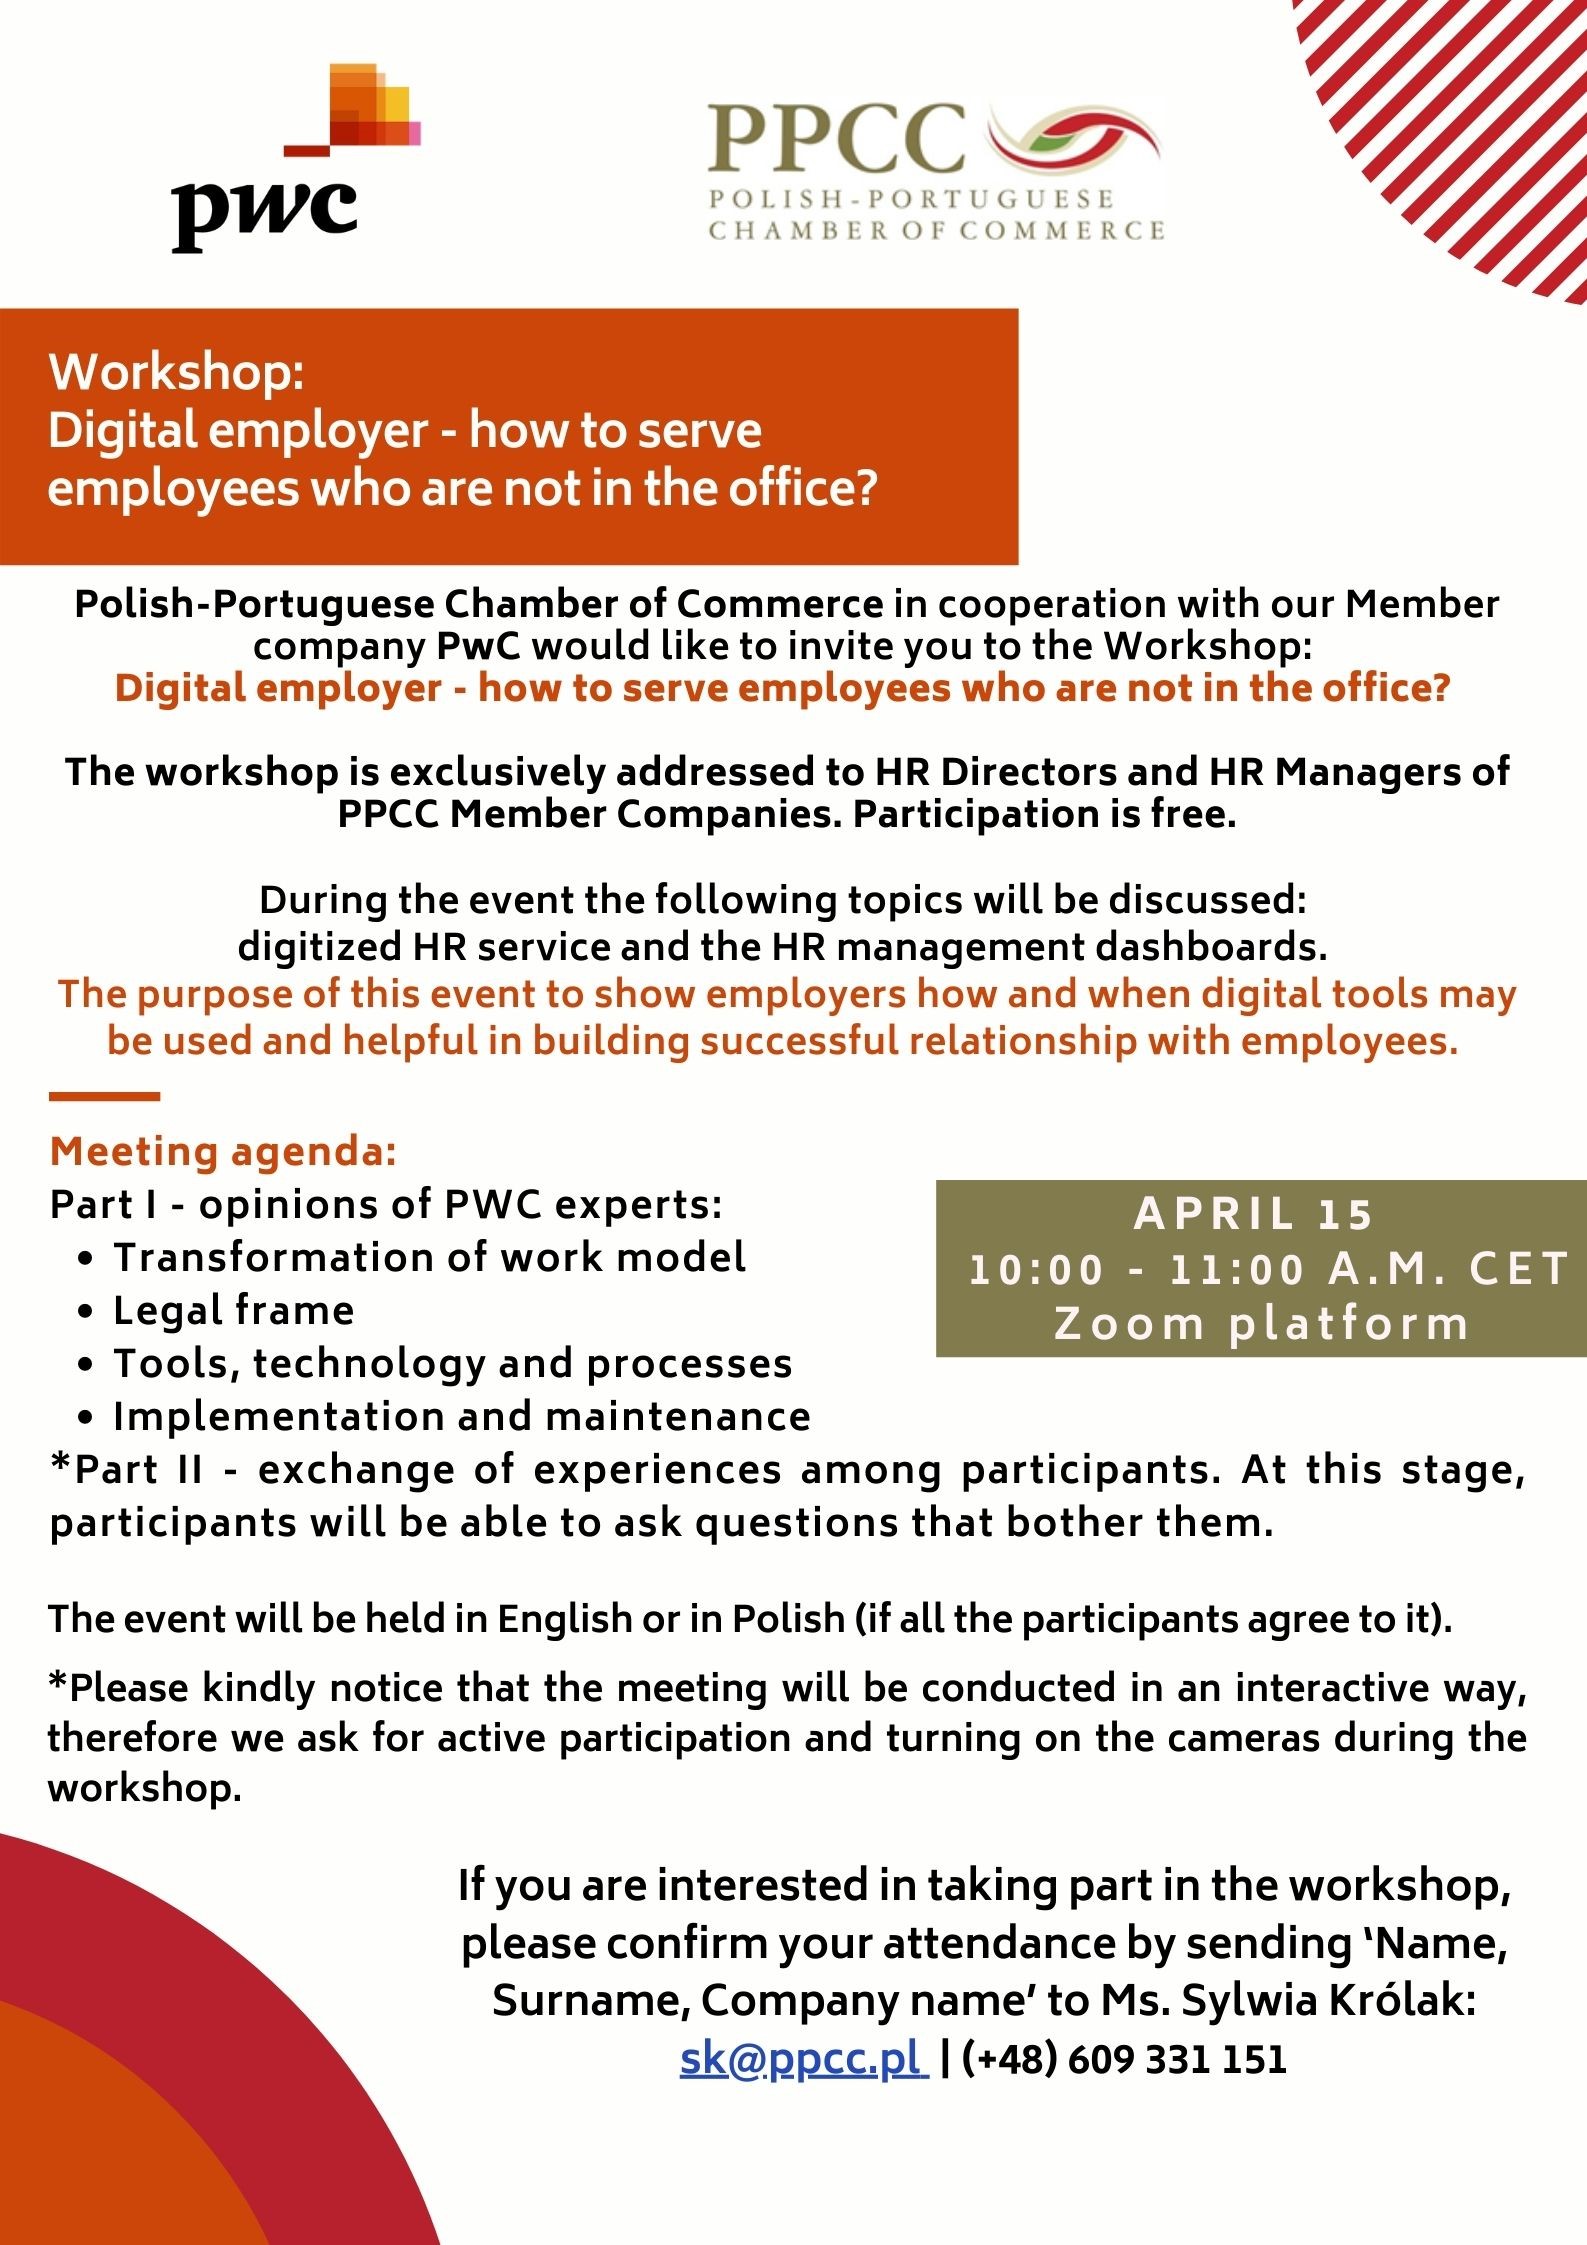 PPCC & PwC Workshop: Digital employer - how to serve employees who are not in the office?